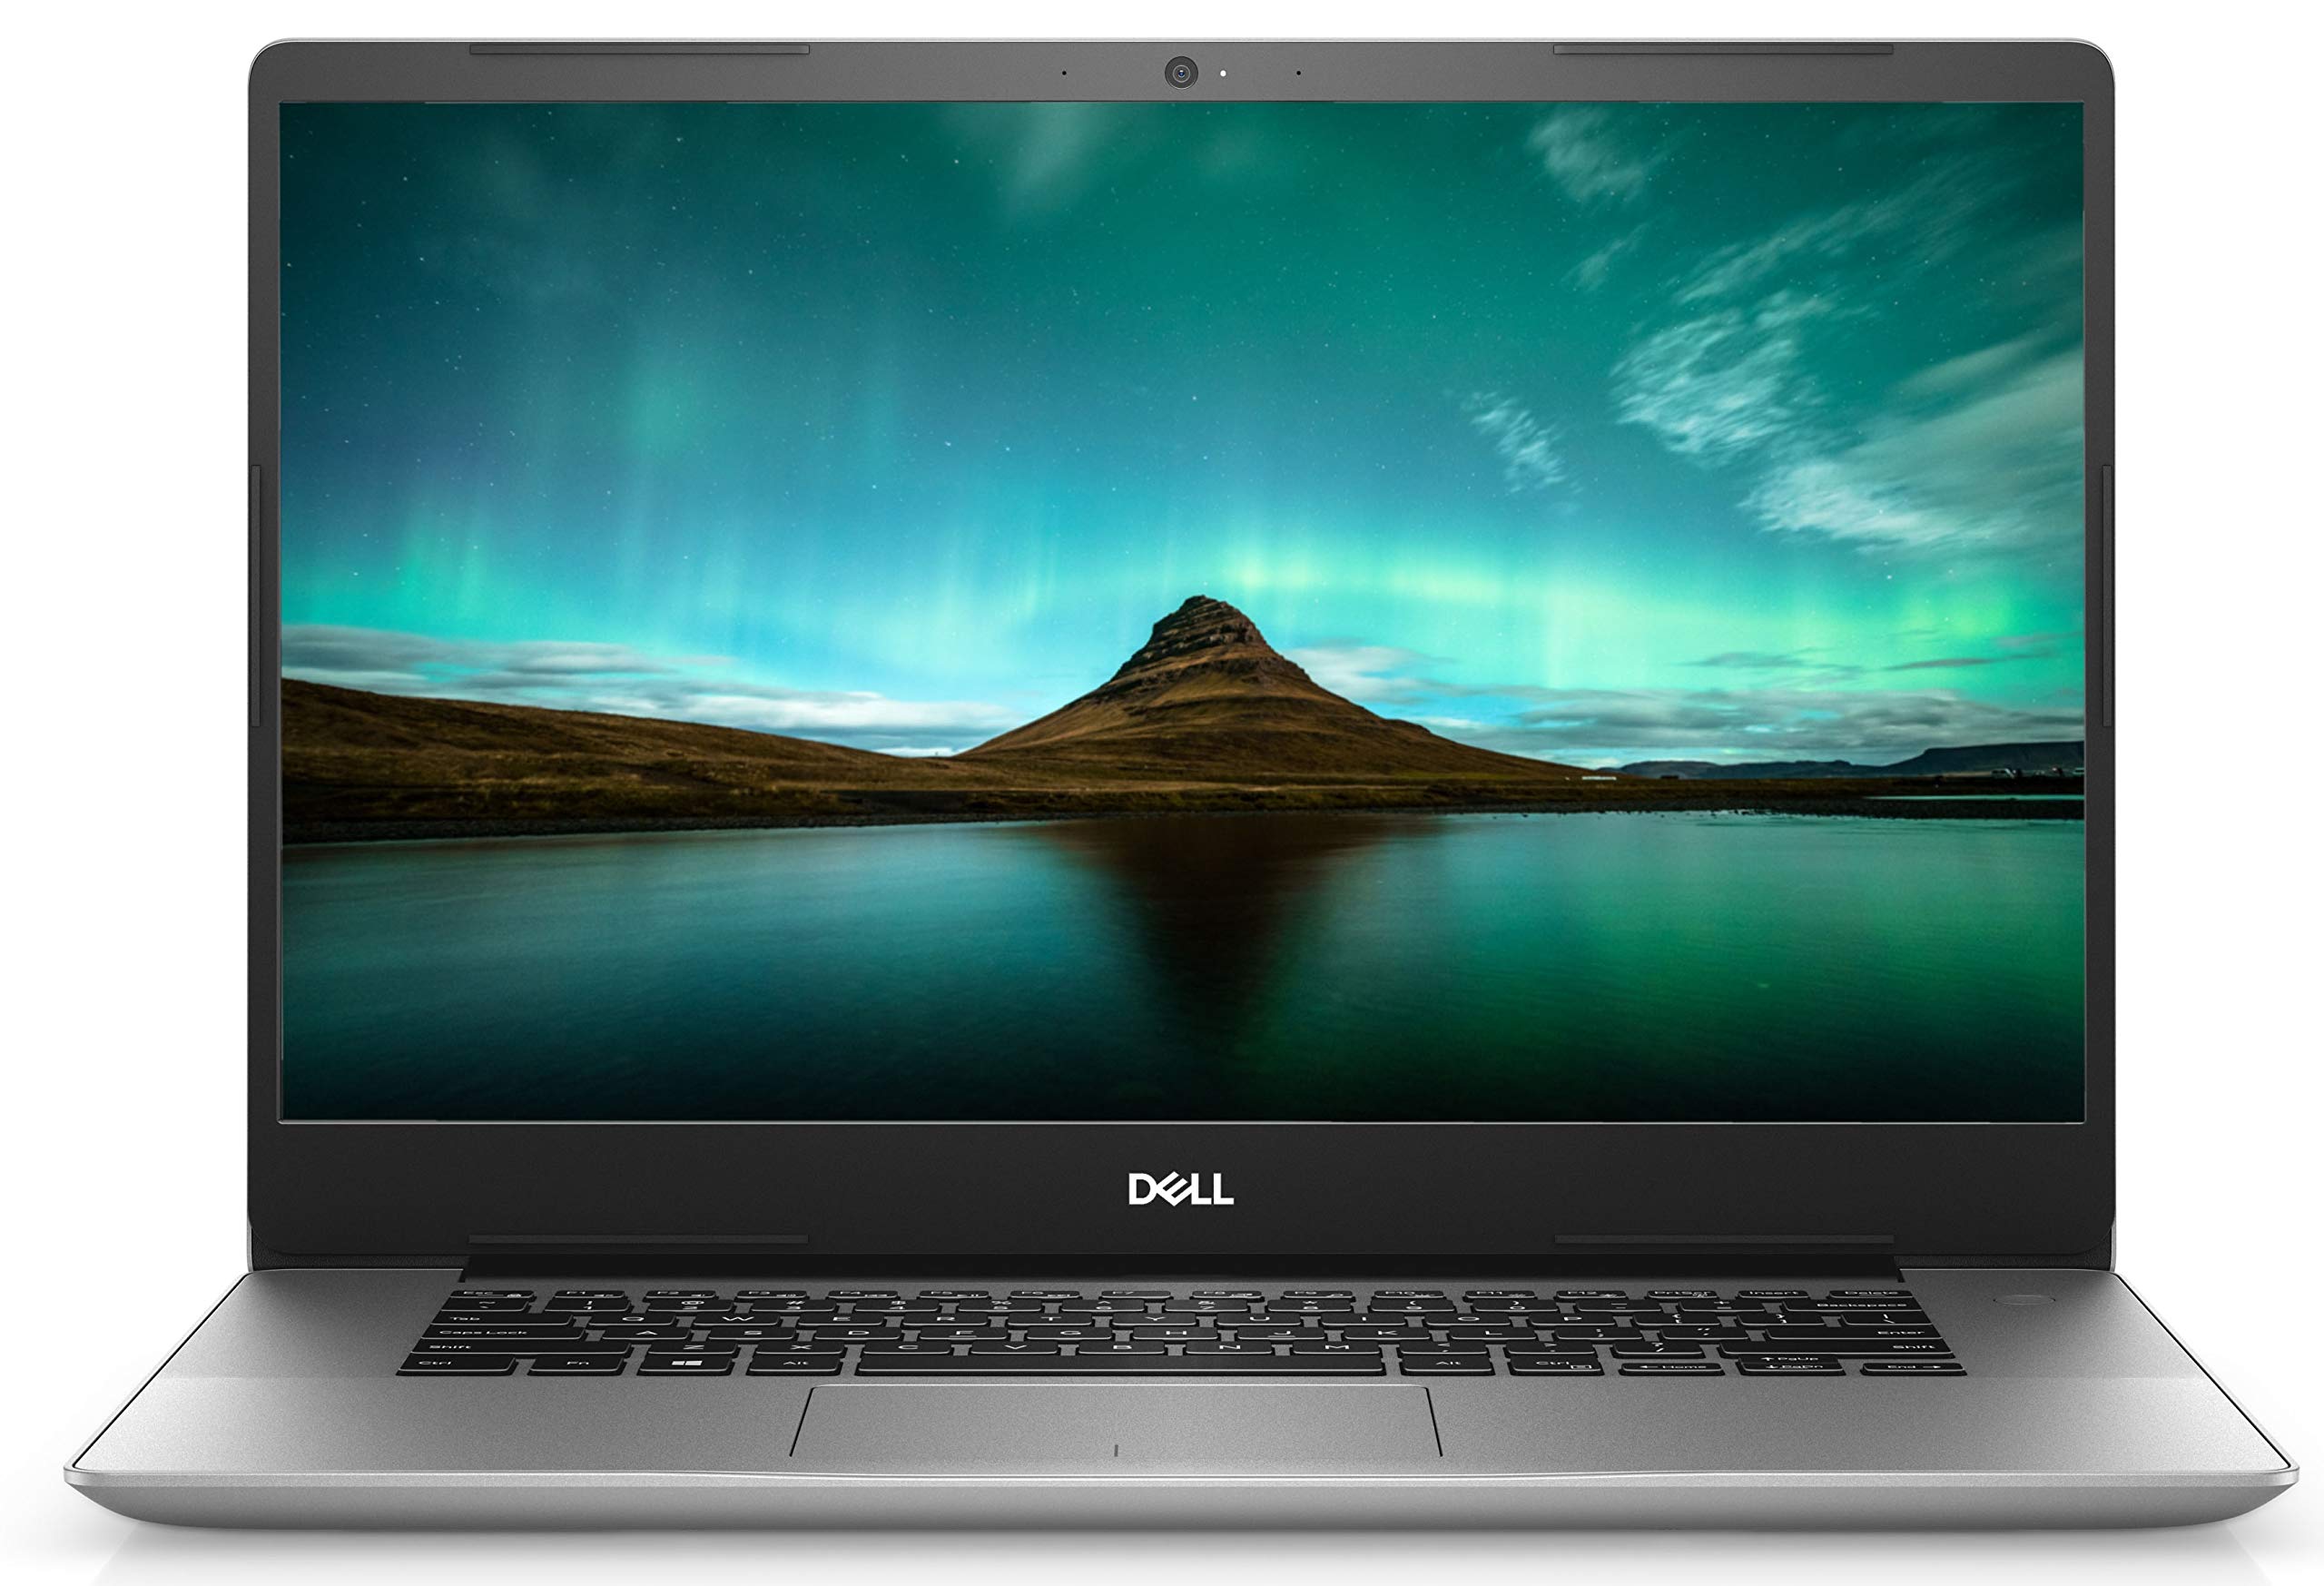  Dell Inspiron 15 5582 Notebook